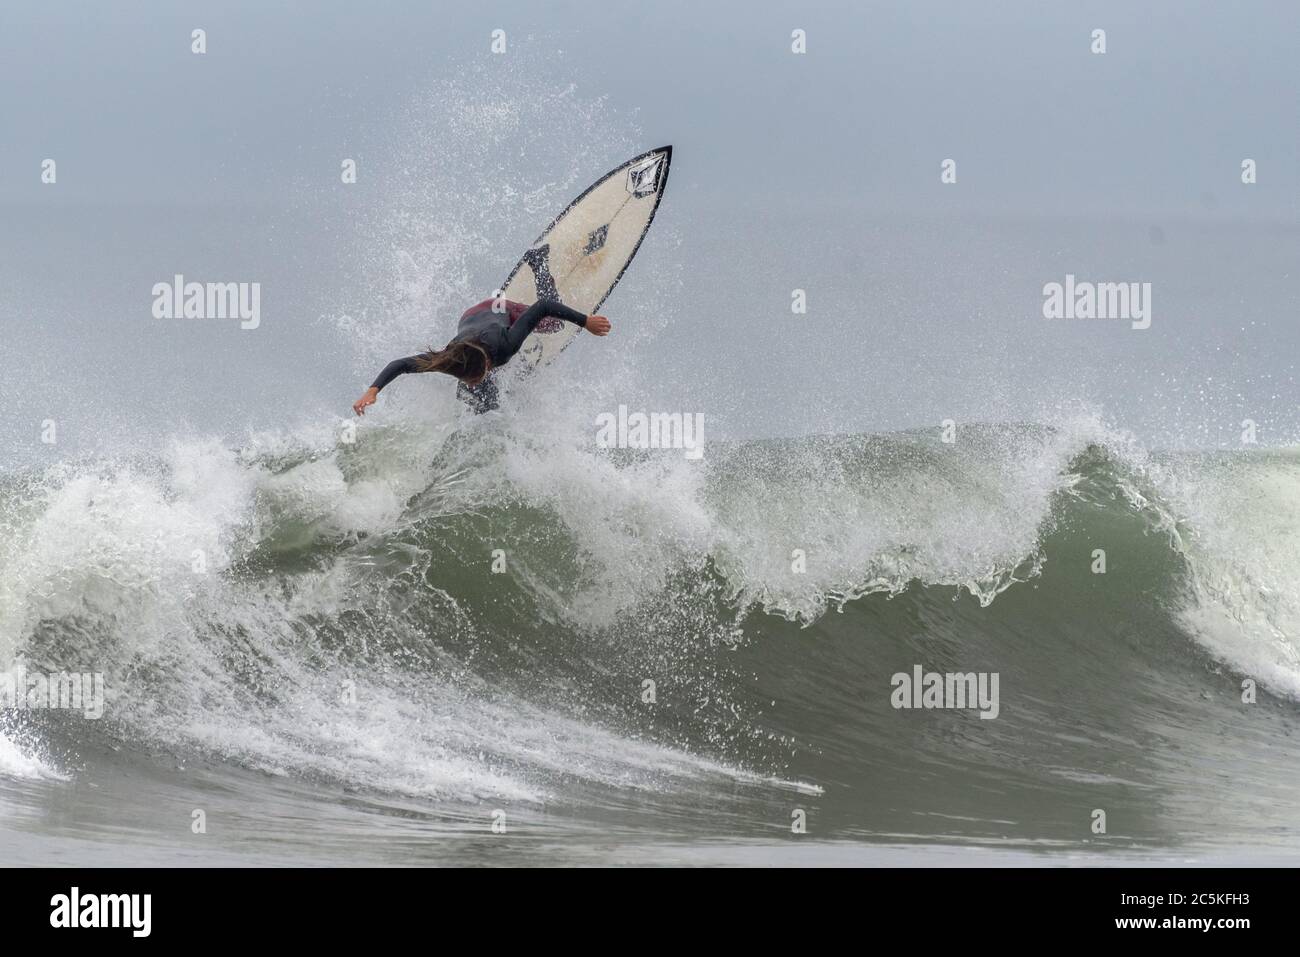 Young male surfer throws up spray and launches straight up above the face of a breaking wave at Surfer's Knoll in Ventura, California, USA on July 2, Stock Photo